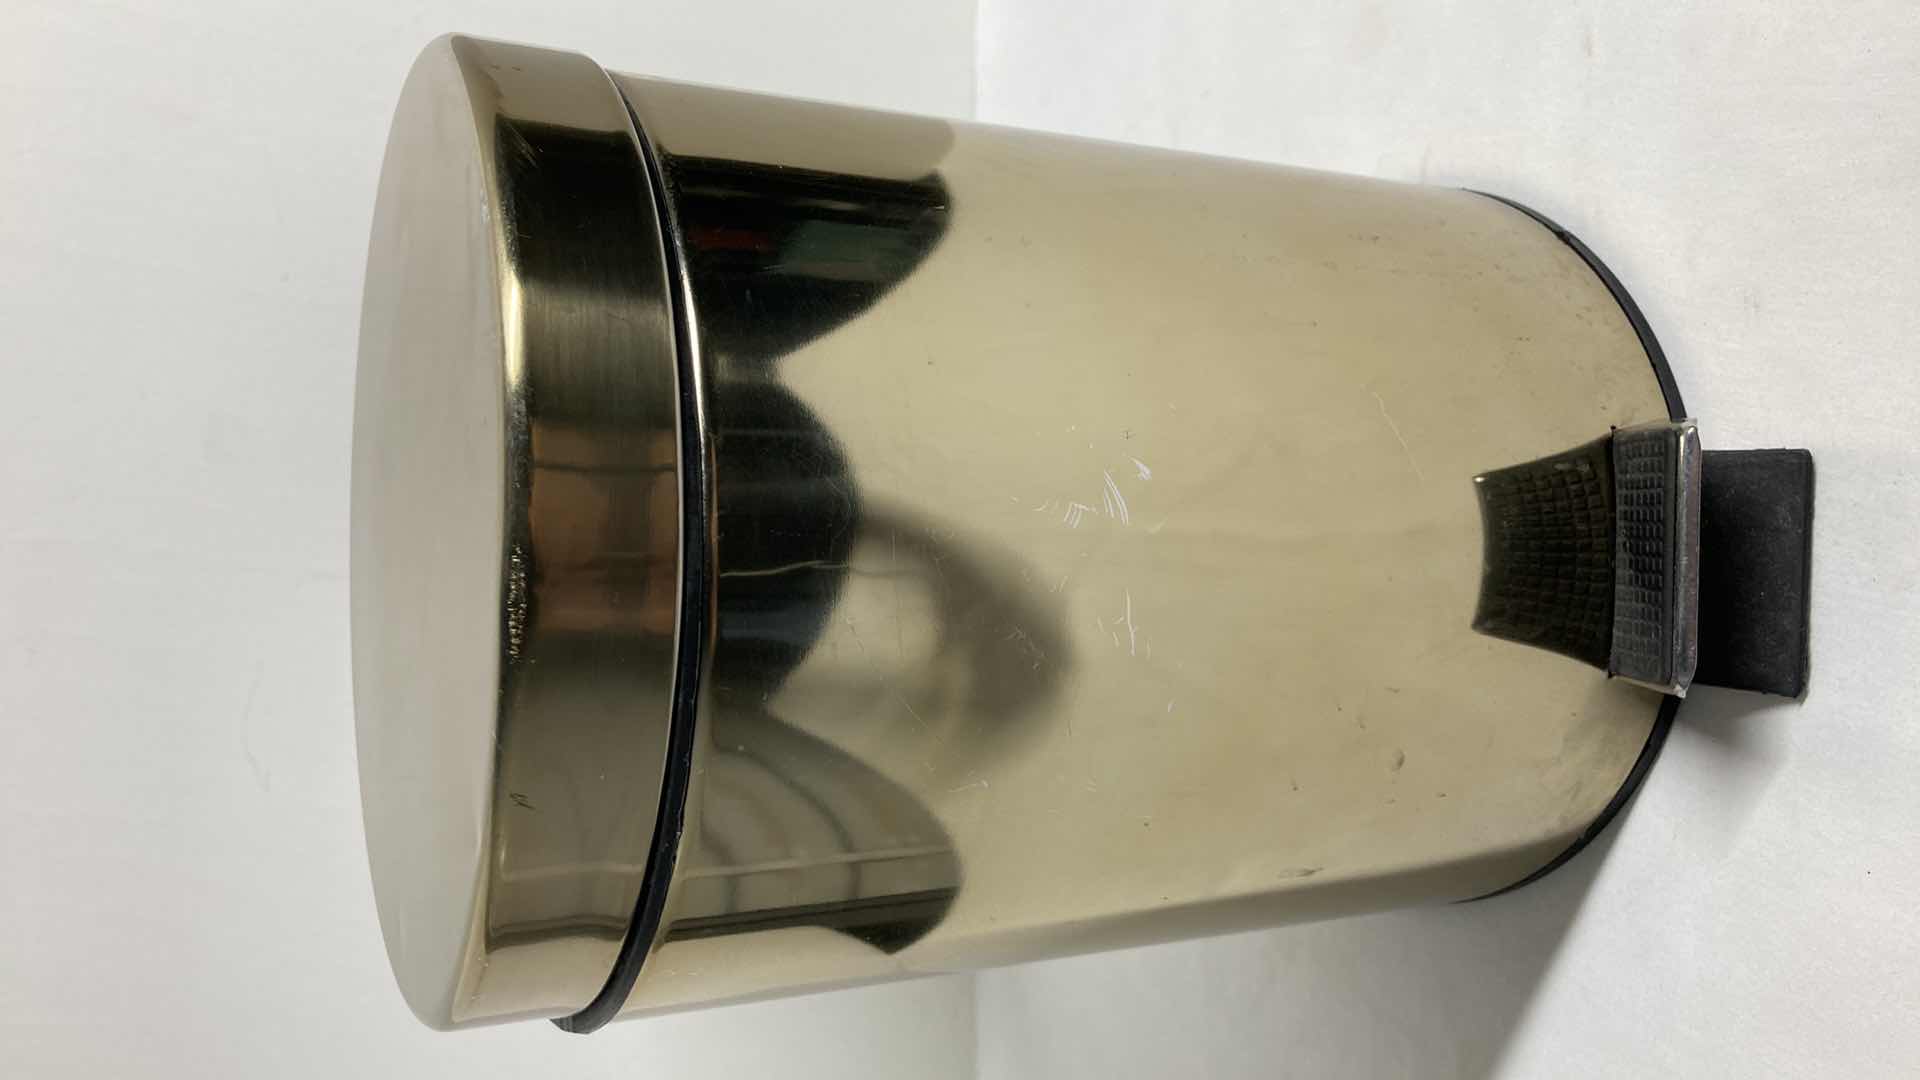 Photo 1 of STEP LEVER SOFT BRASS FINISH 5LITER TRASH CAN